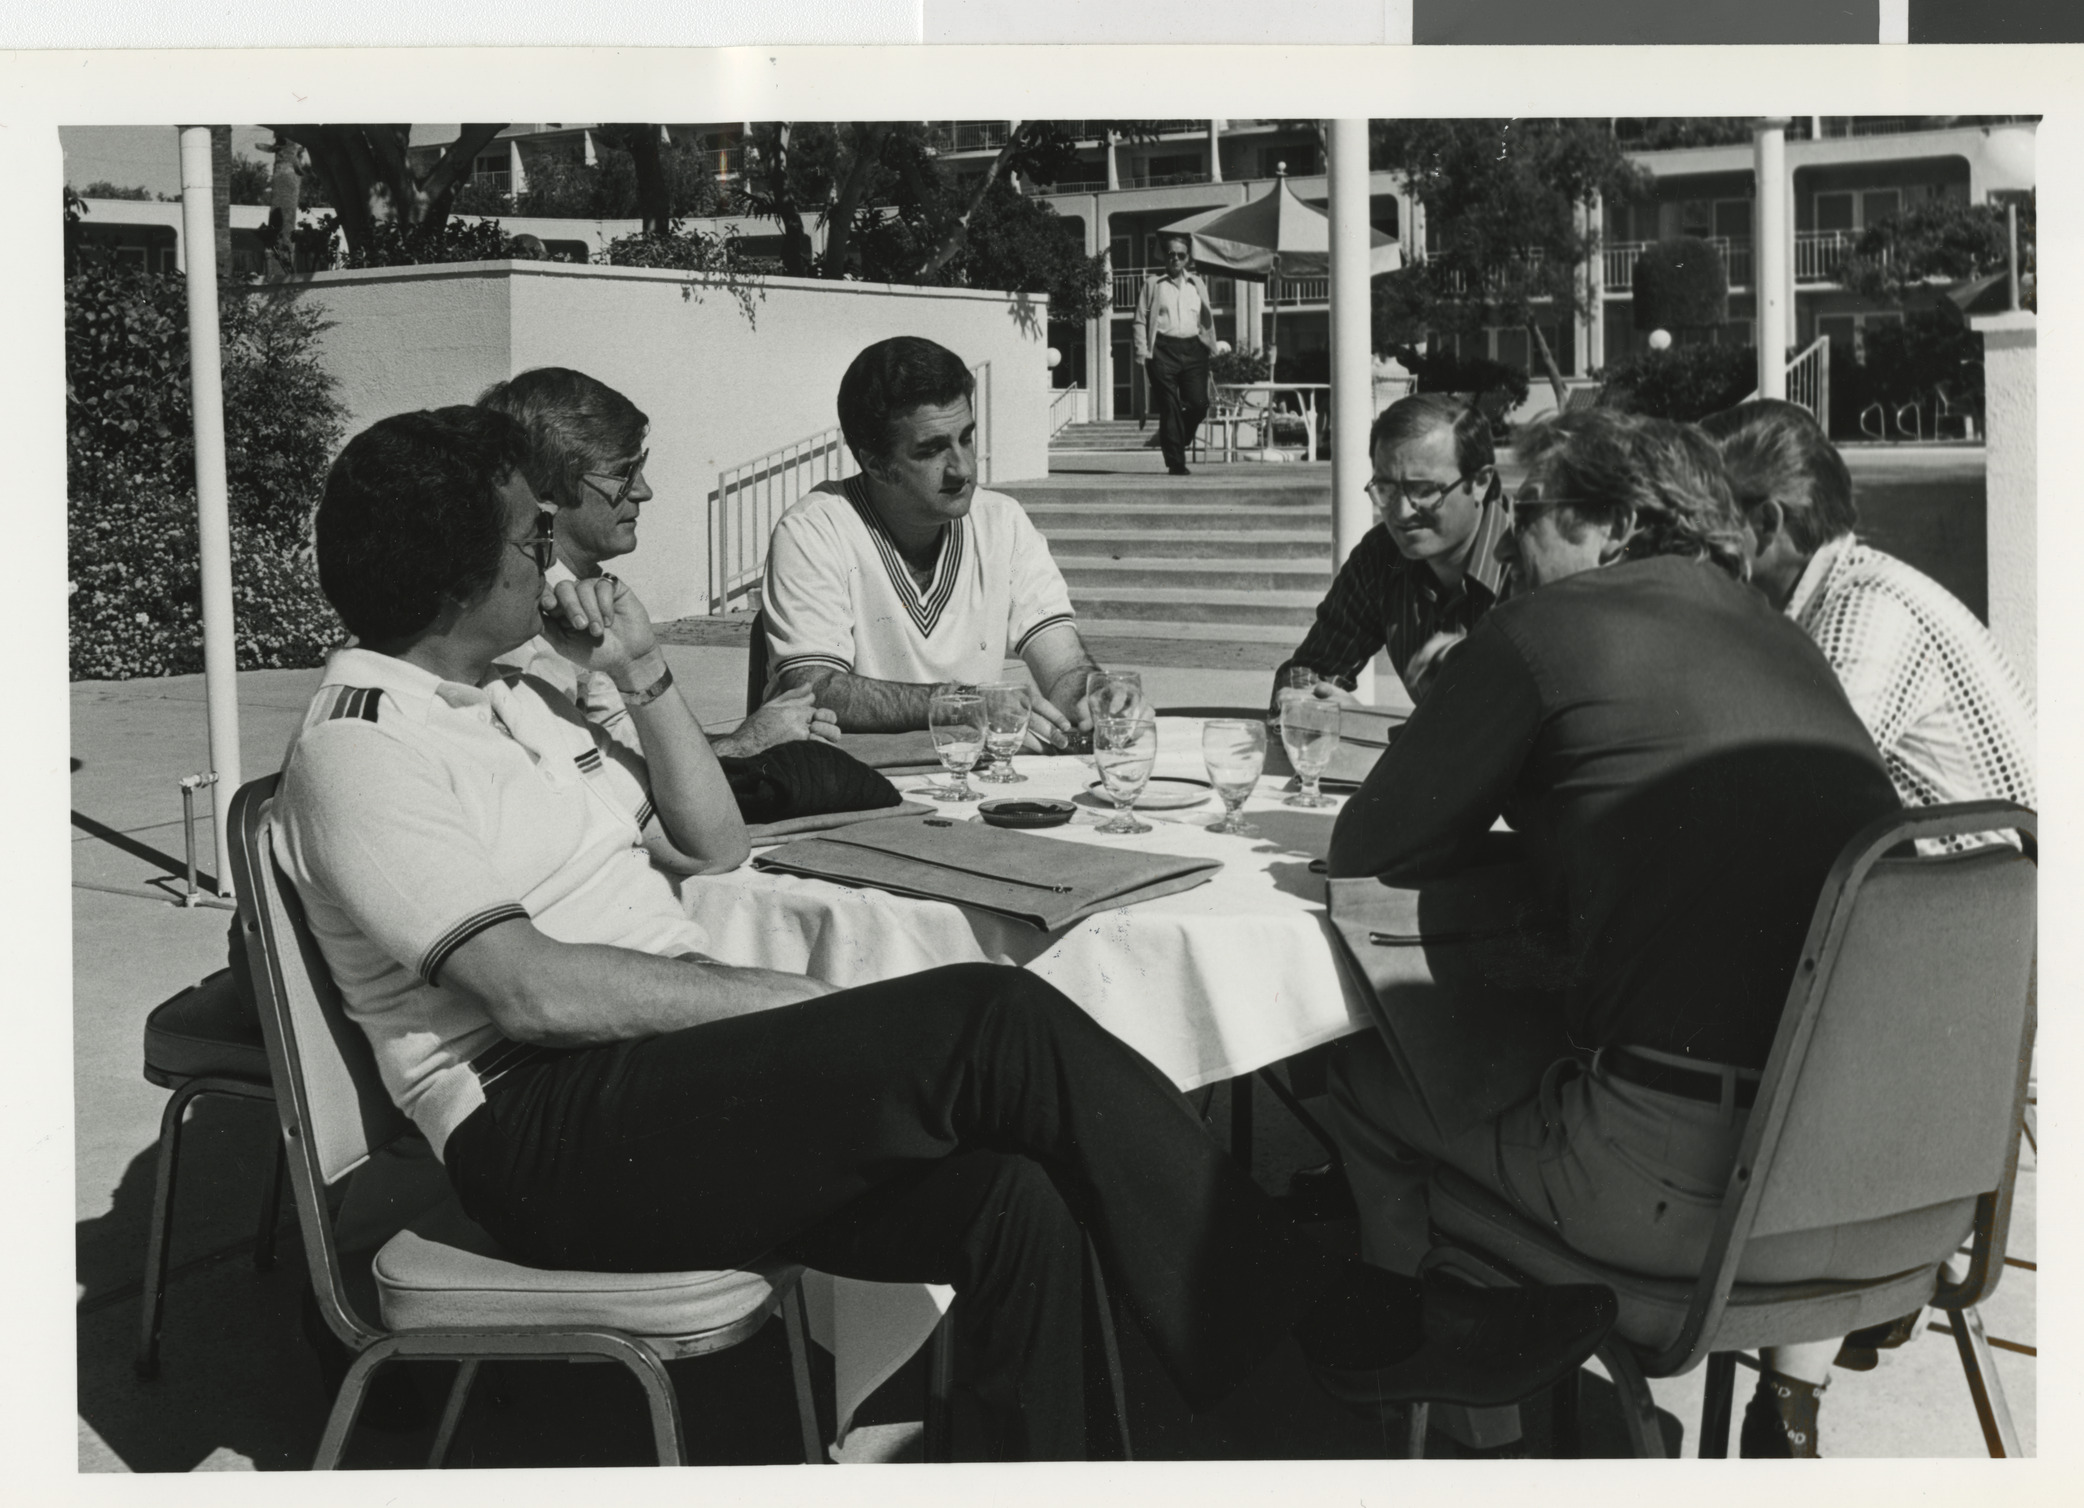 Photograph of Ron Lurie seated at a table with unidentified people outdoors